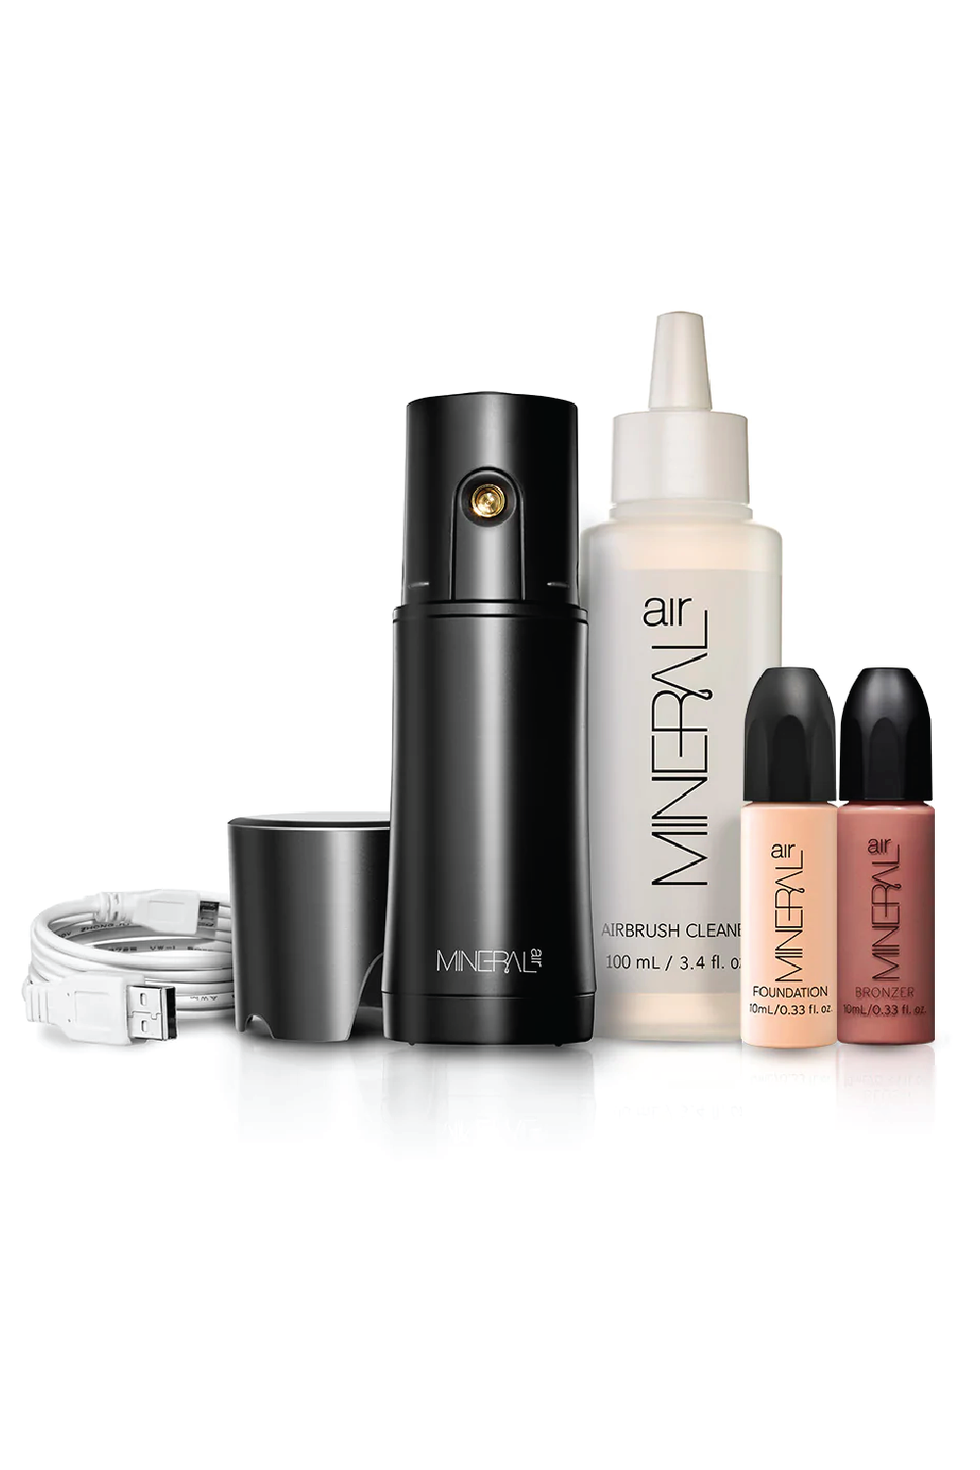 LUMINESS LAUNCHES SPRAY FOUNDATION FOR A FLAWLESS AIRBRUSH FINISH, WITHOUT  AN AIRBRUSH